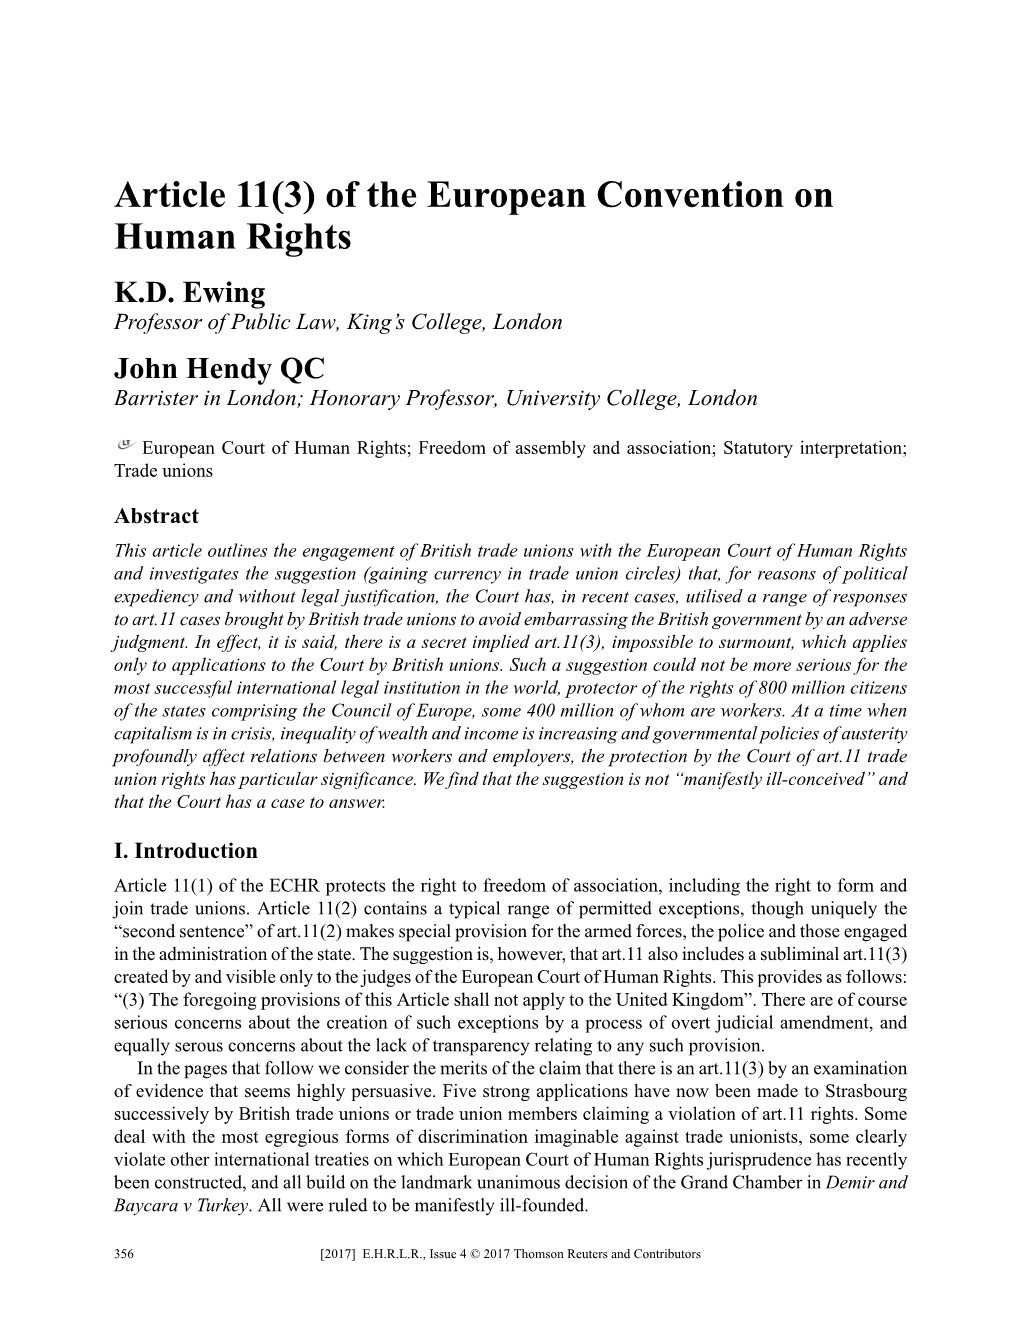 Download Hendy Article Treatment of UK Ecthr Cases